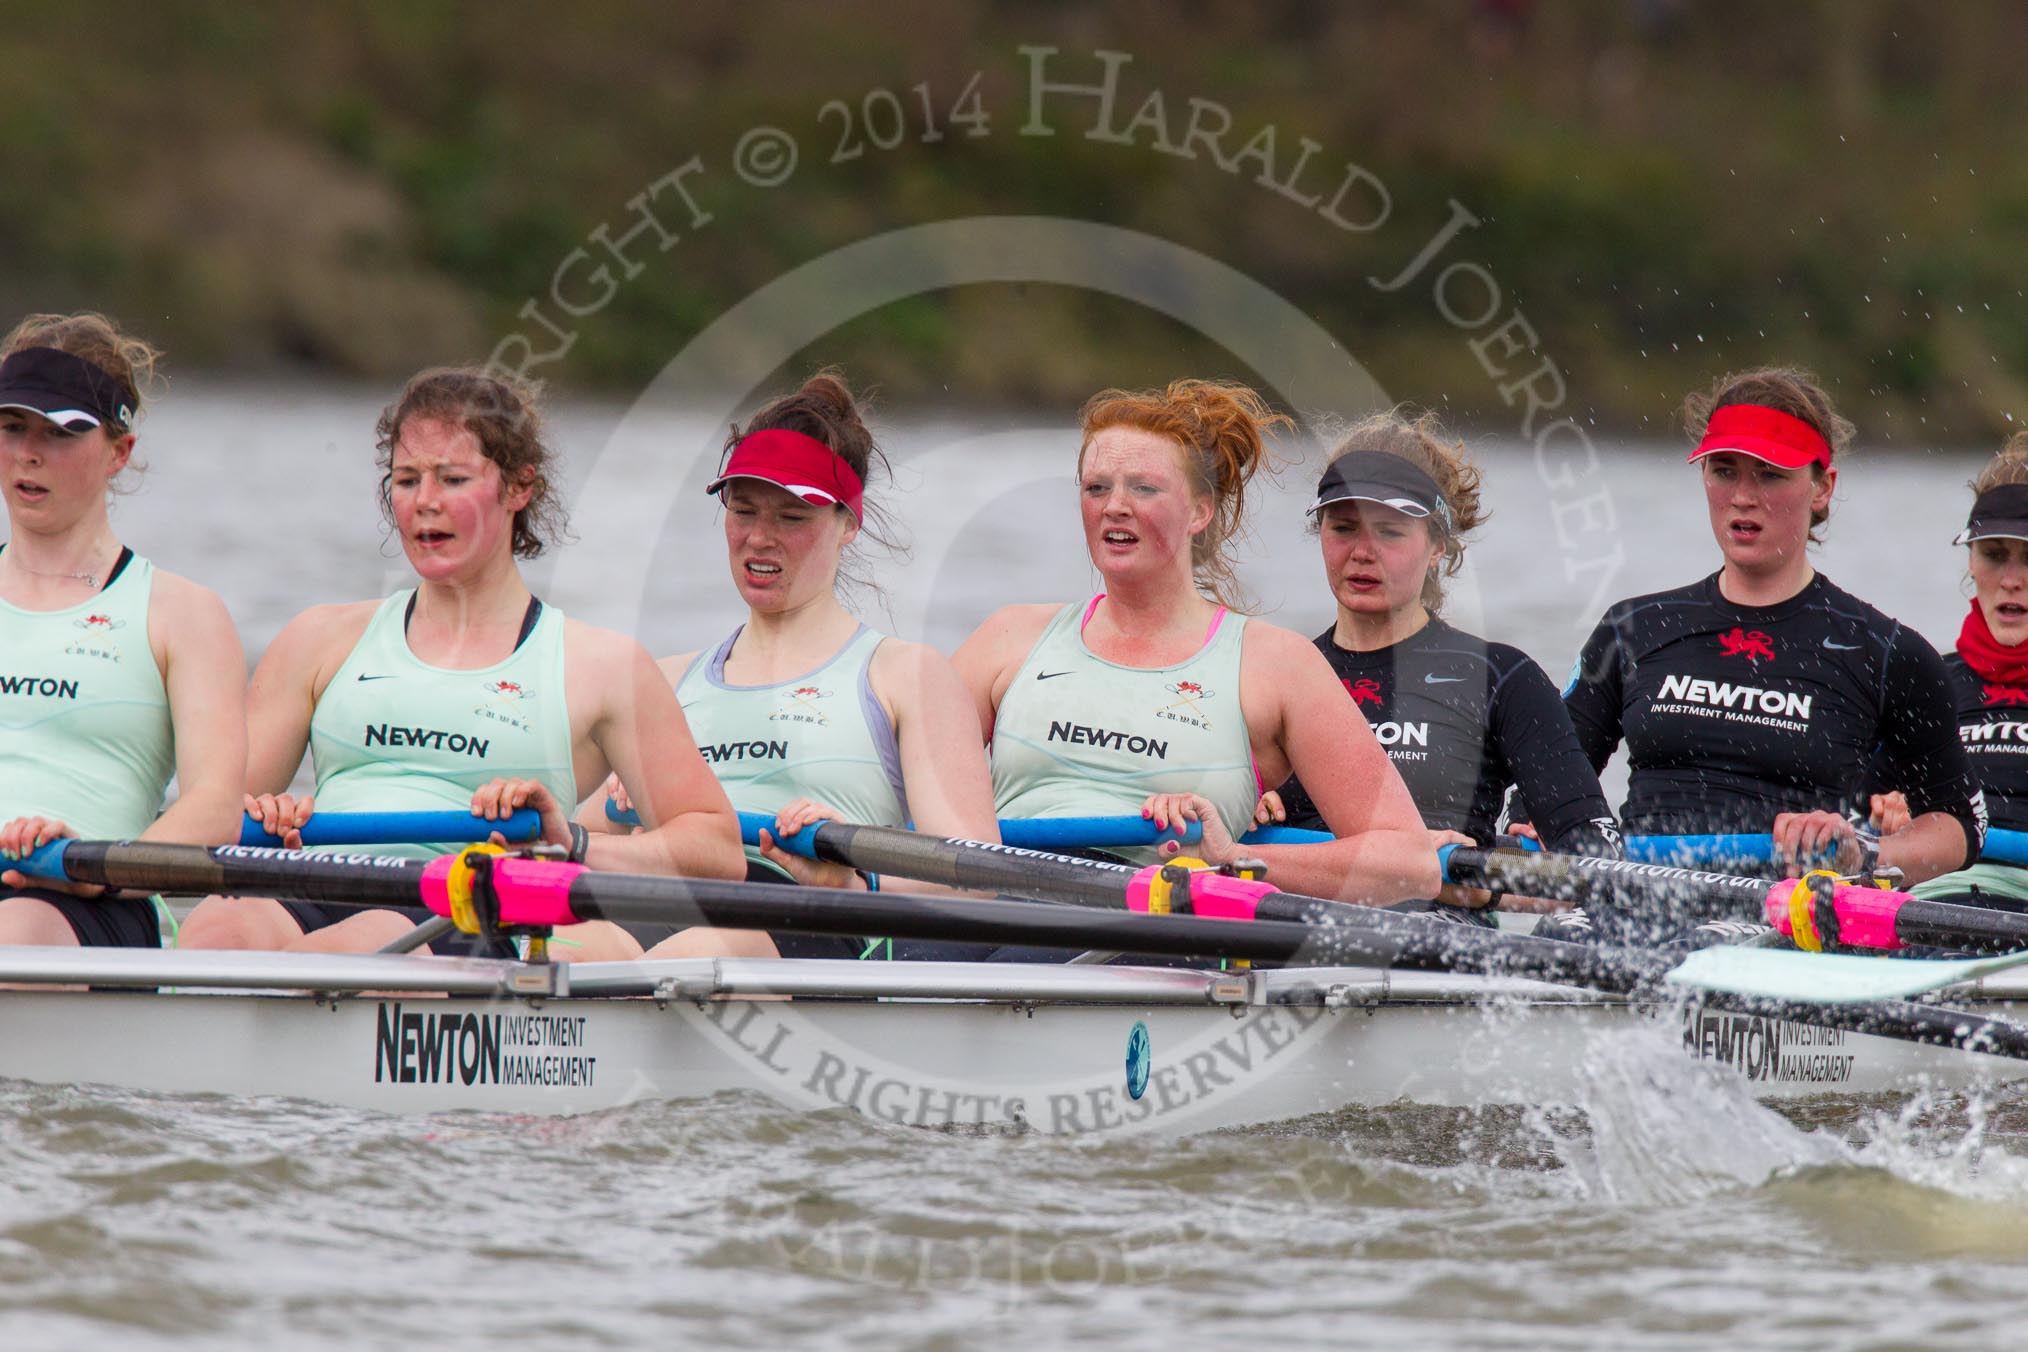 The Boat Race season 2014 - fixture CUWBC vs Thames RC: In the Cambridge boat 6 Melissa Wilson, 5 Catherine Foot, 4 Izzy Vyvyan, 3 Holly Game, 2 Kate Ashley, bow Caroline Reid..




on 02 March 2014 at 13:13, image #75